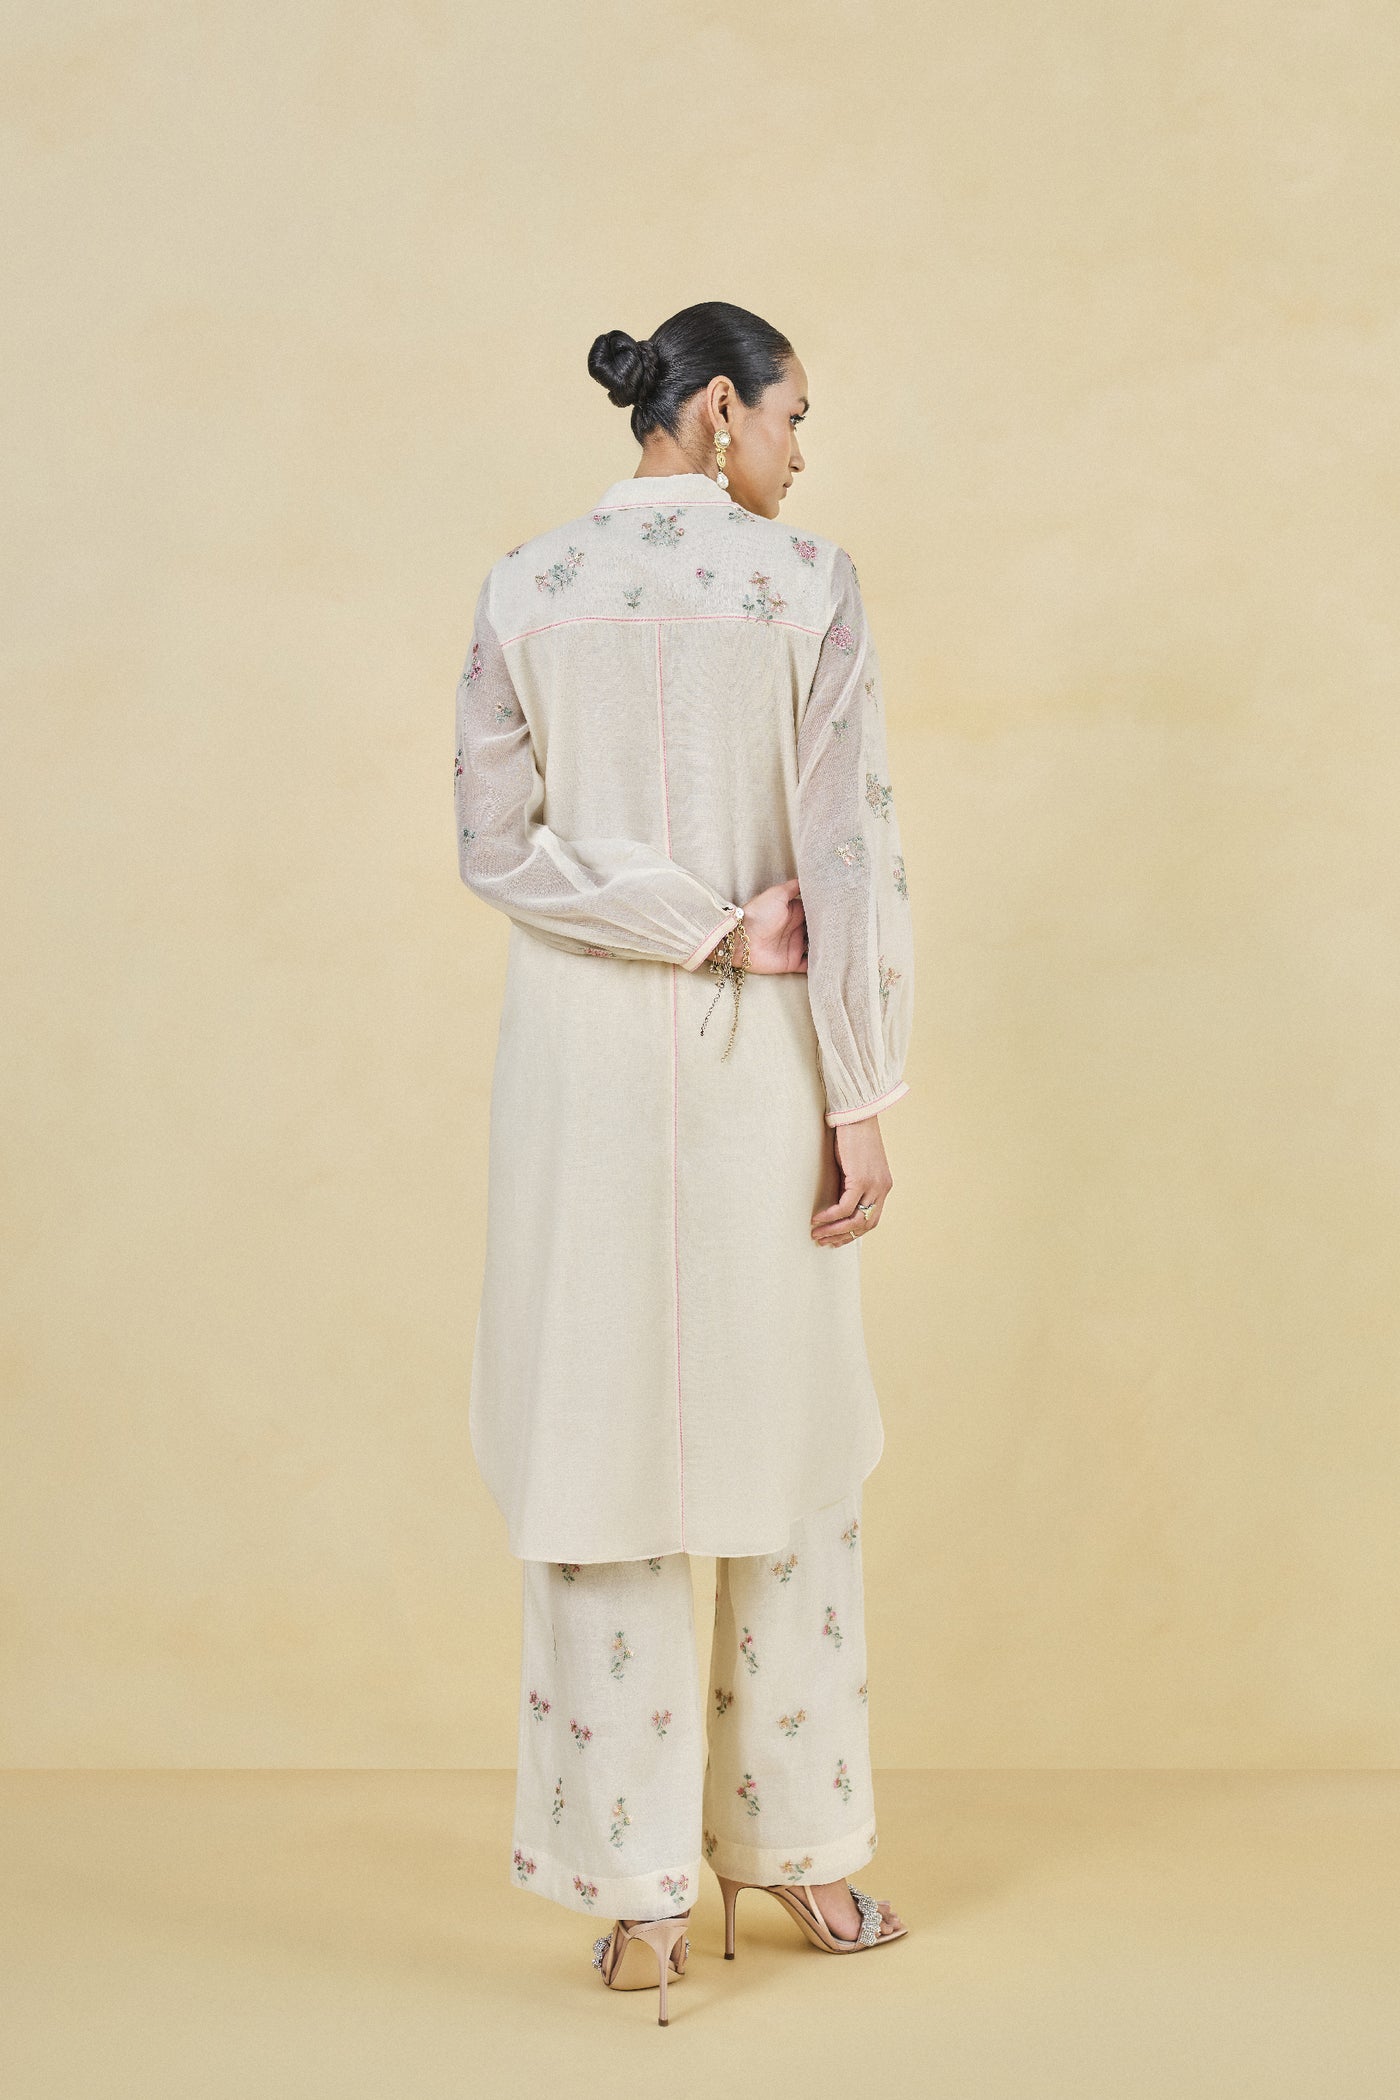 Anita Dongre Rhapsody Embroidered Lyocell Coord Natural indian designer wear online shopping melange singapore